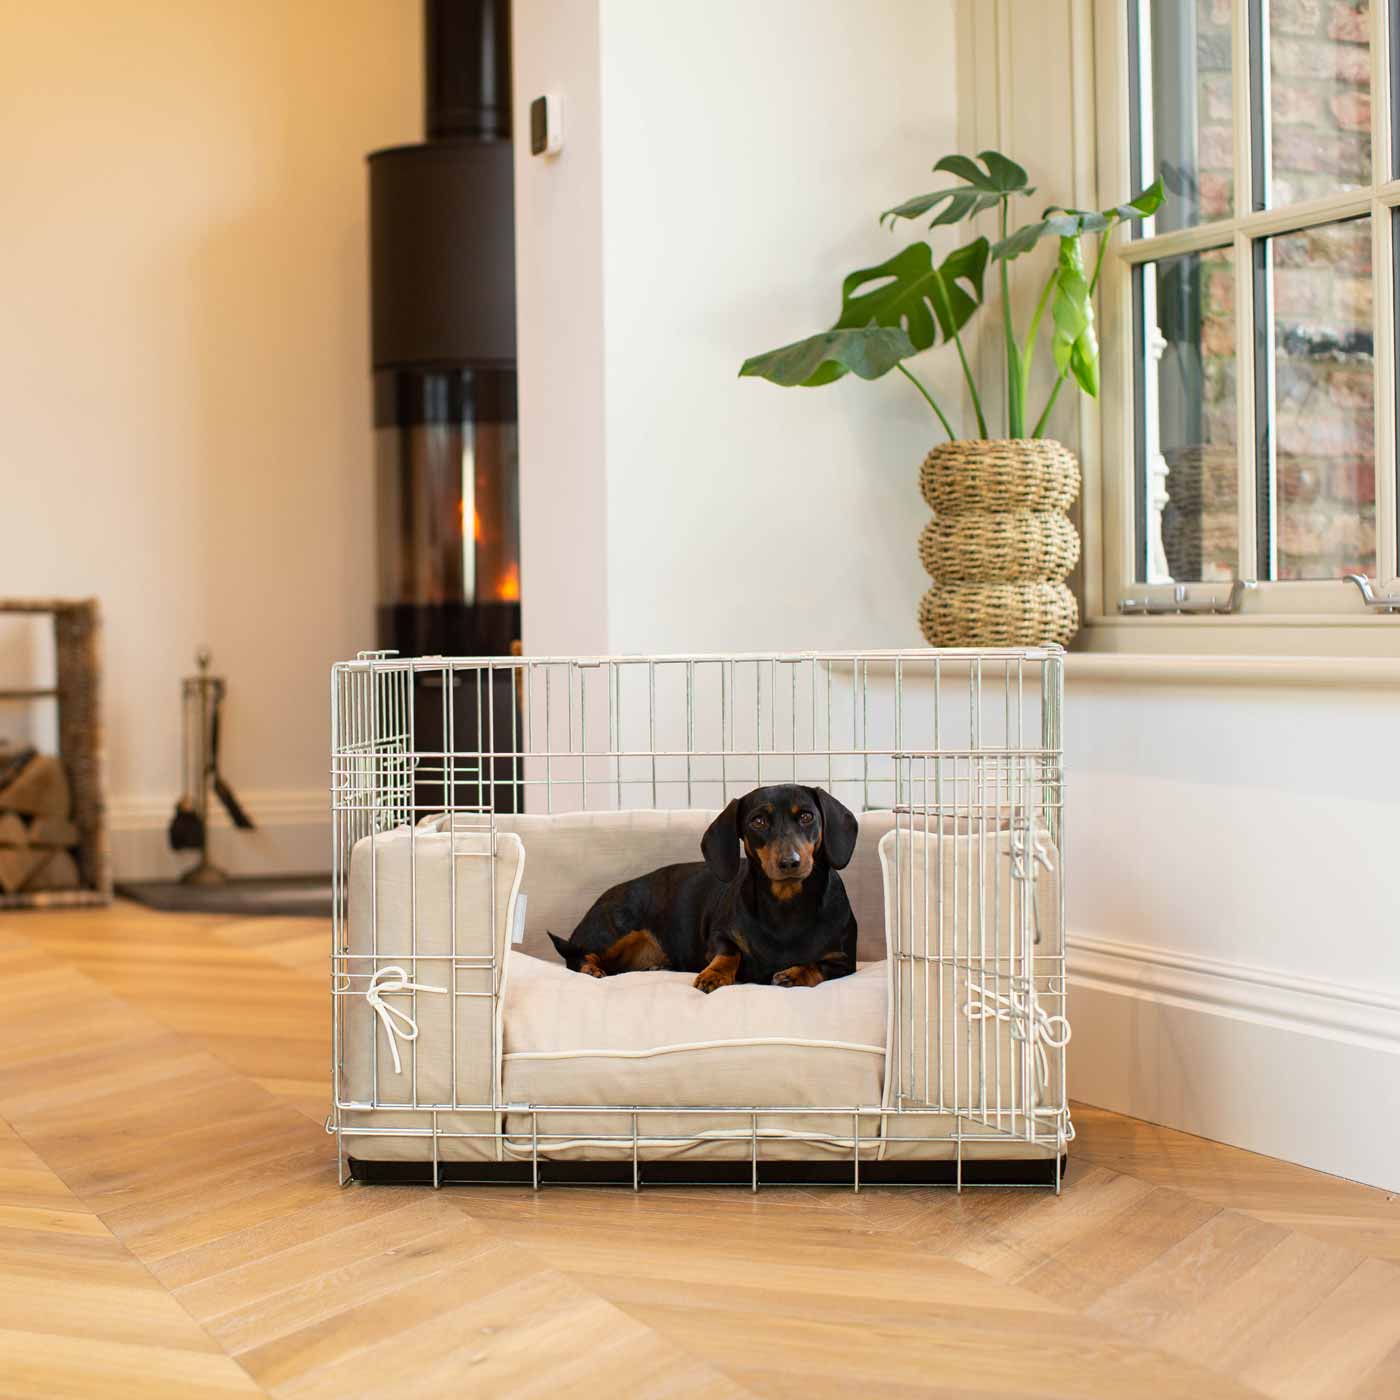 Luxury Dog Cage Bumper, Savanna Oatmeal Cage Bumper Cover The Perfect Dog Cage Accessory, Available To Personalize Now at Lords & Labradors US